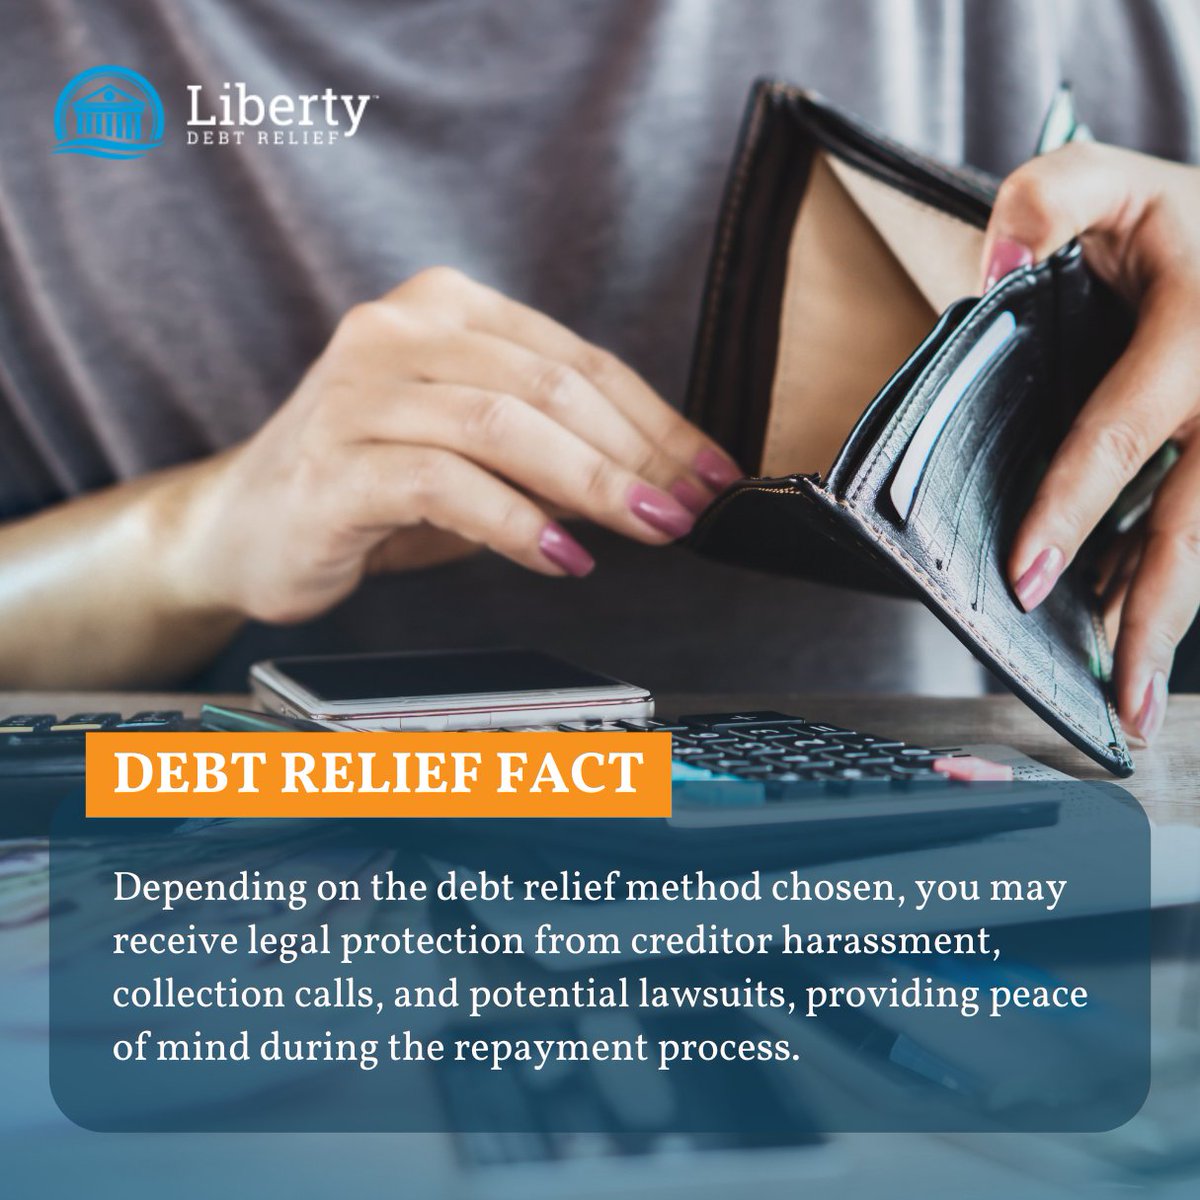 Here is a quick debt relief fact!

Depending on the debt relief method chosen, you may receive legal protection from creditor harassment, collection calls, and potential lawsuits, providing peace of mind during the repayment process.

#DebtSettlement #FinancialRelief